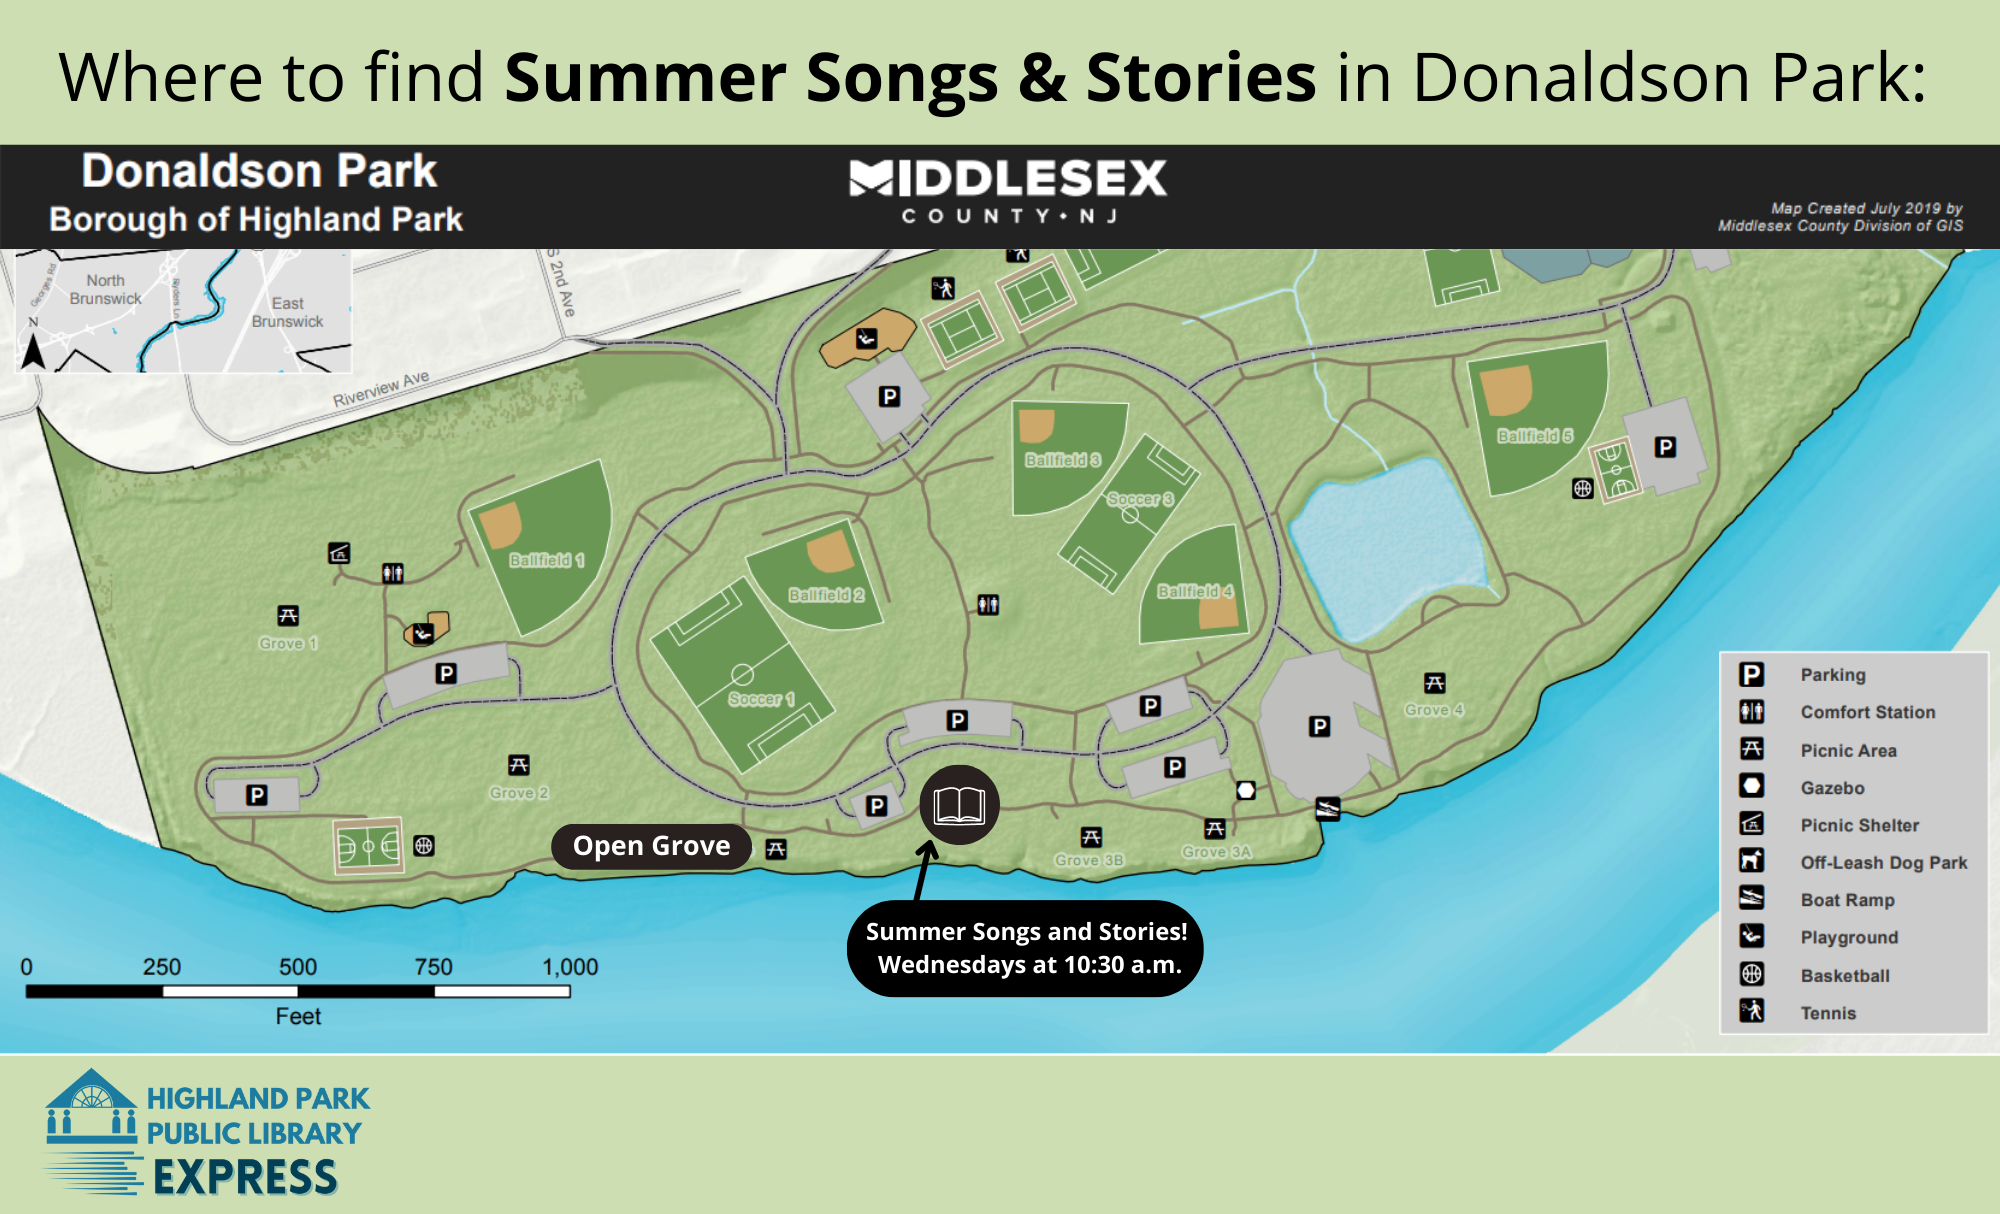 Image: Map of Donaldson park with book icon next to open grove location near Raritan River